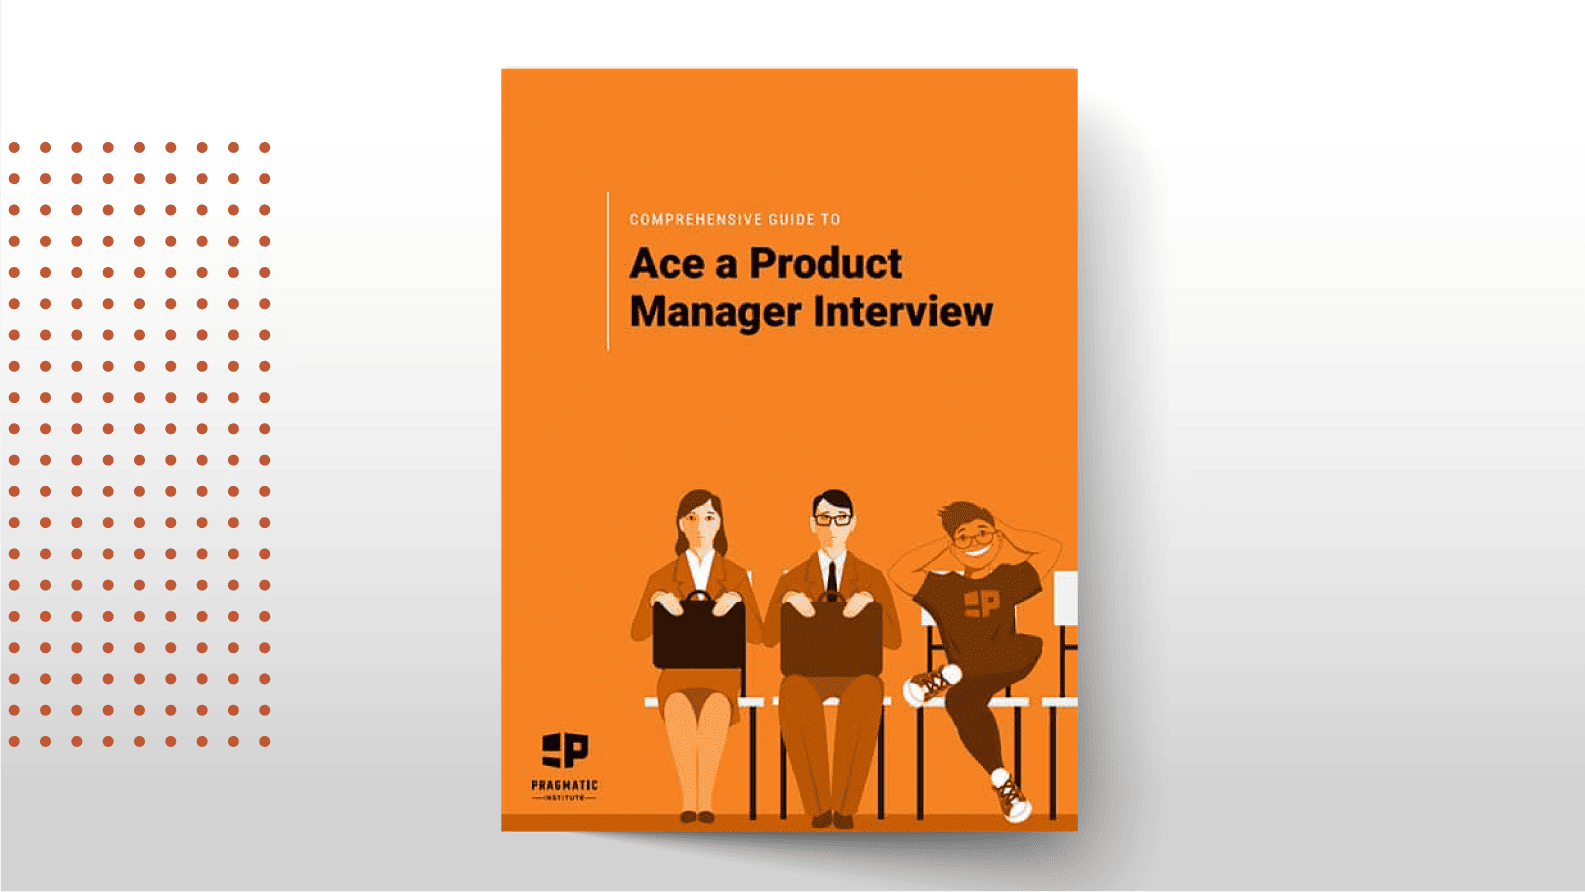 Ace a Product Manager Interview